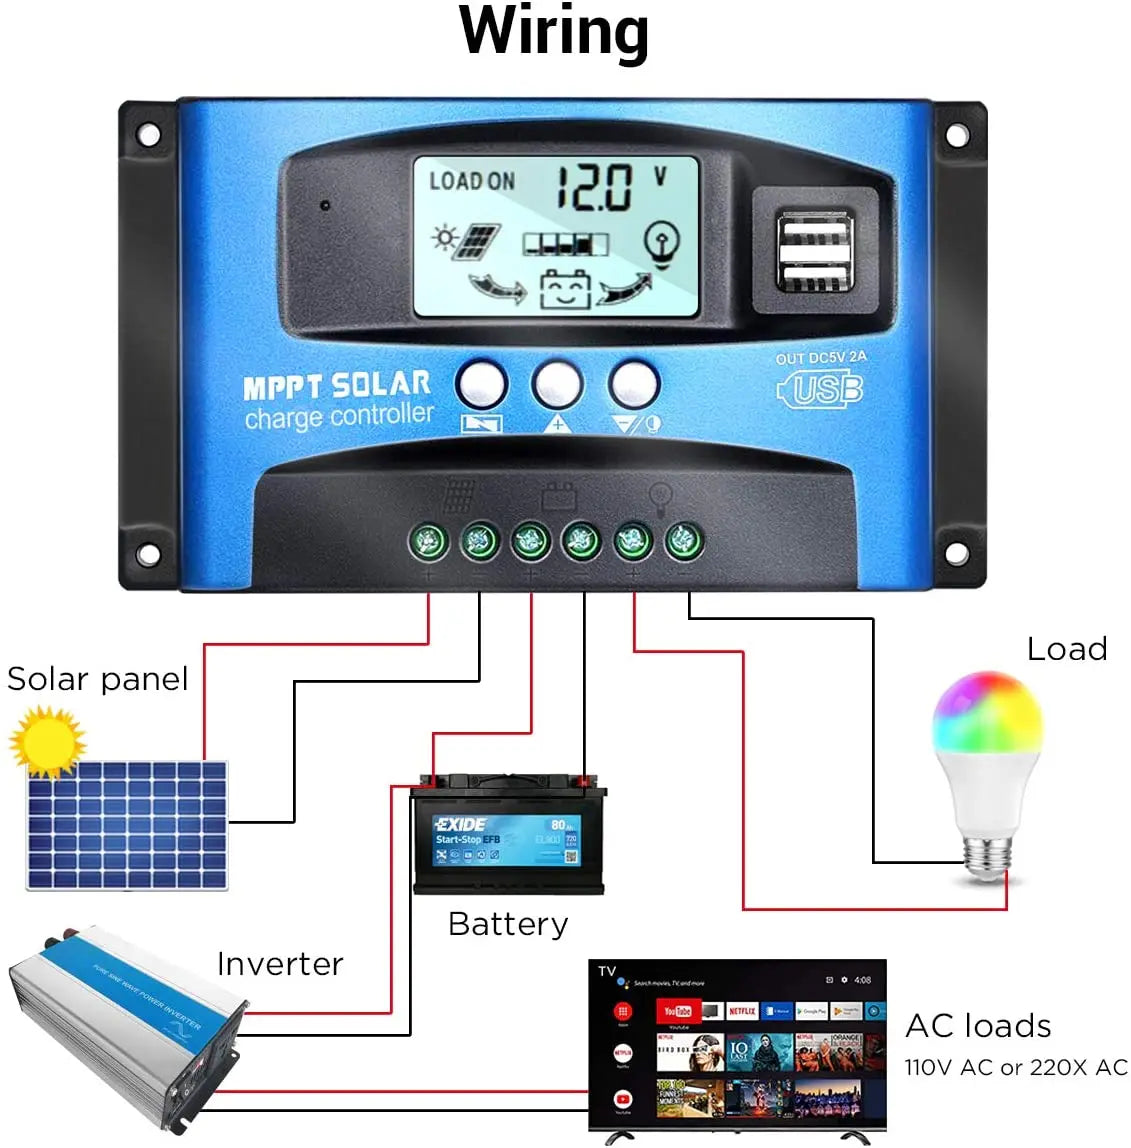 Solar charge controller regulates 12/24V solar panels, supports 100A charging, and features dual USB ports and LCD display.